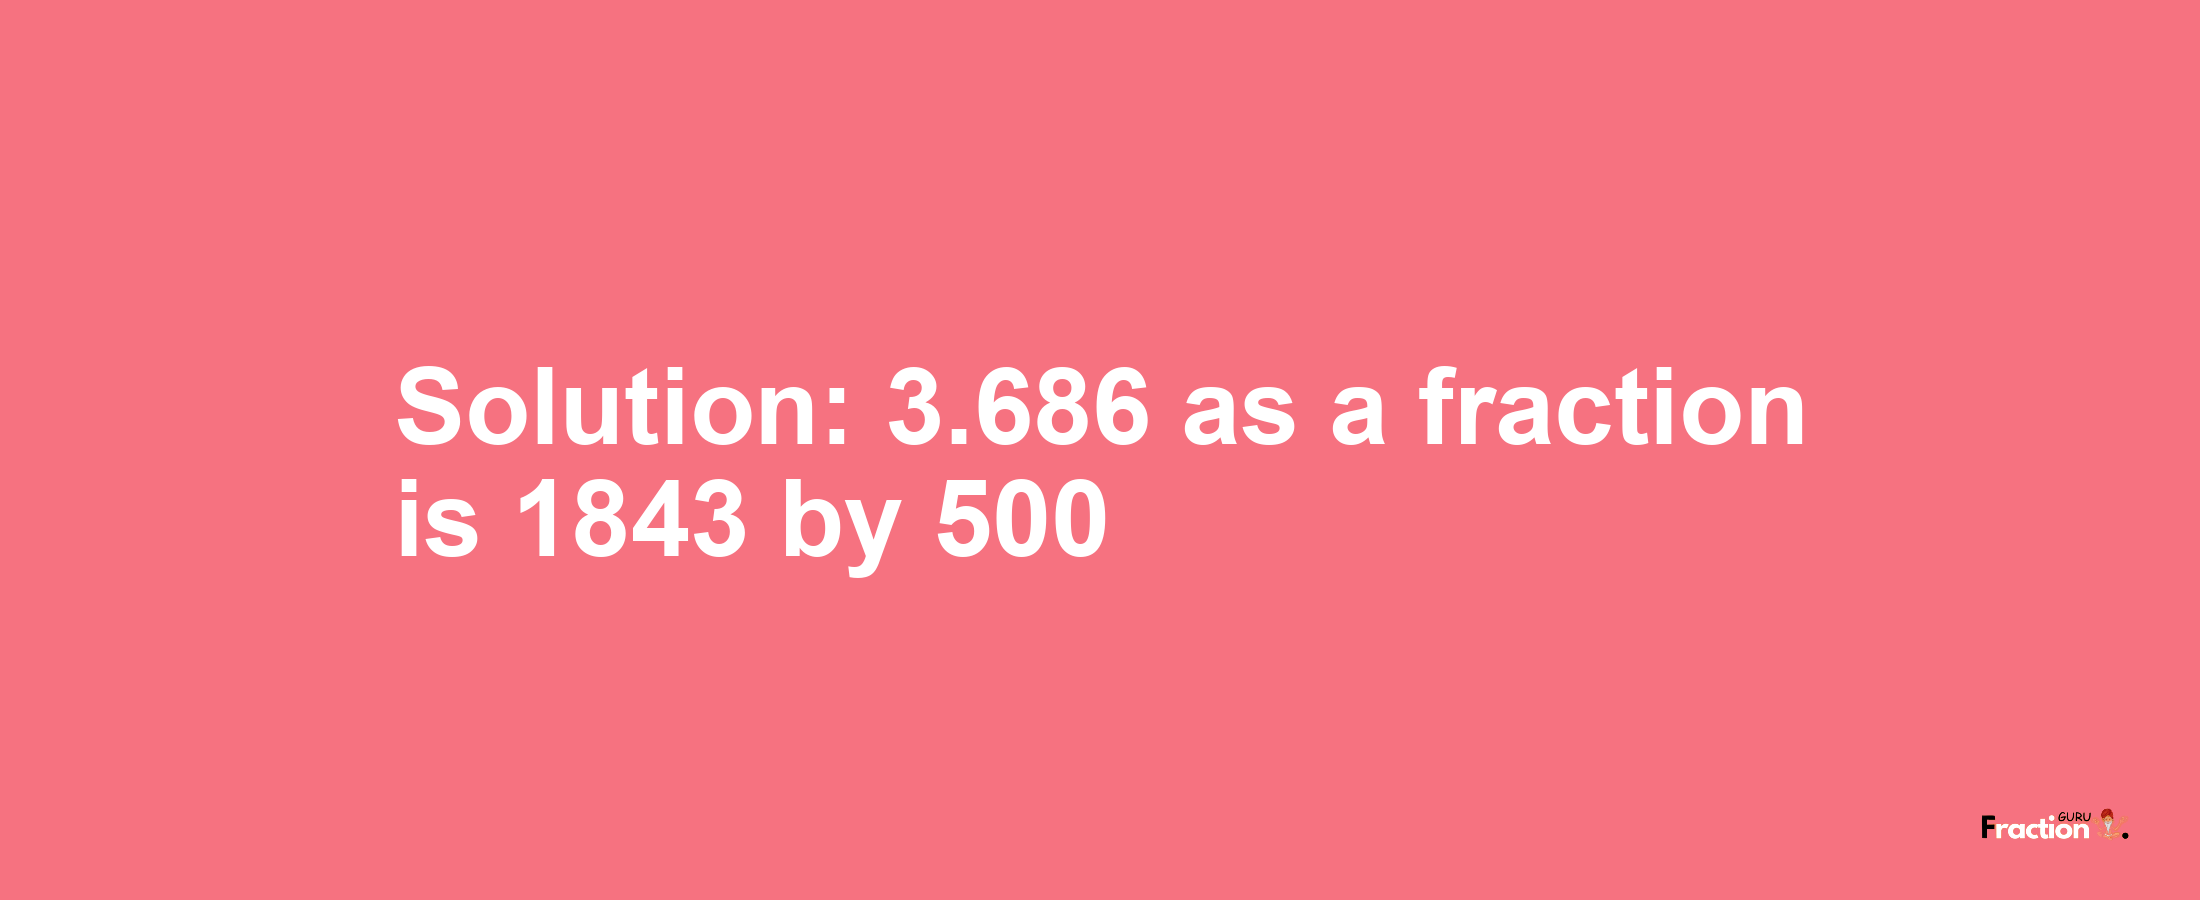 Solution:3.686 as a fraction is 1843/500